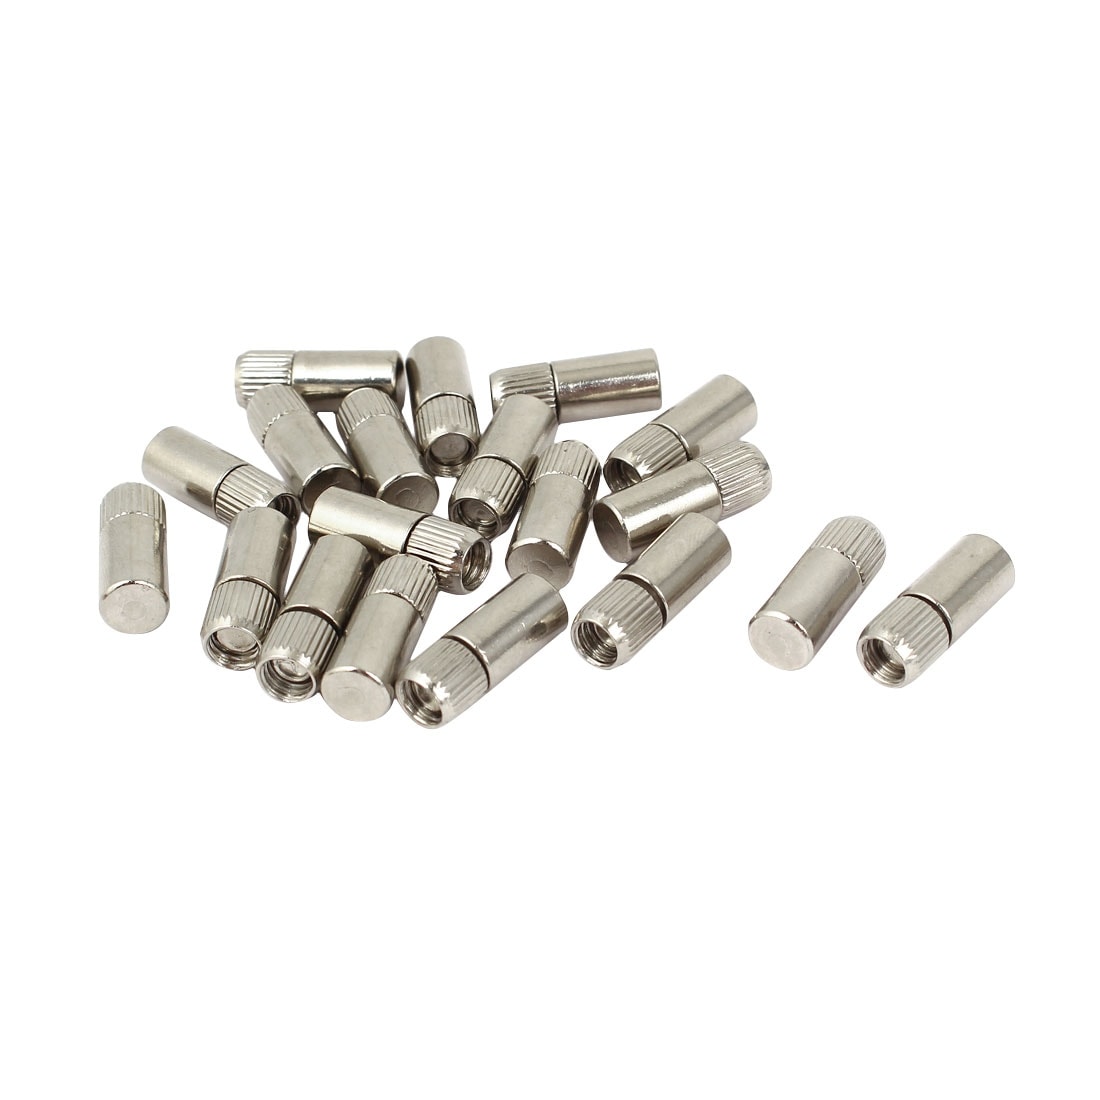 21mm x 8mm Metal Cylindrical Rod Studs Pegs Shelf Support Pins 20PCS -  Silver Tone - On Sale - Bed Bath & Beyond - 35609842